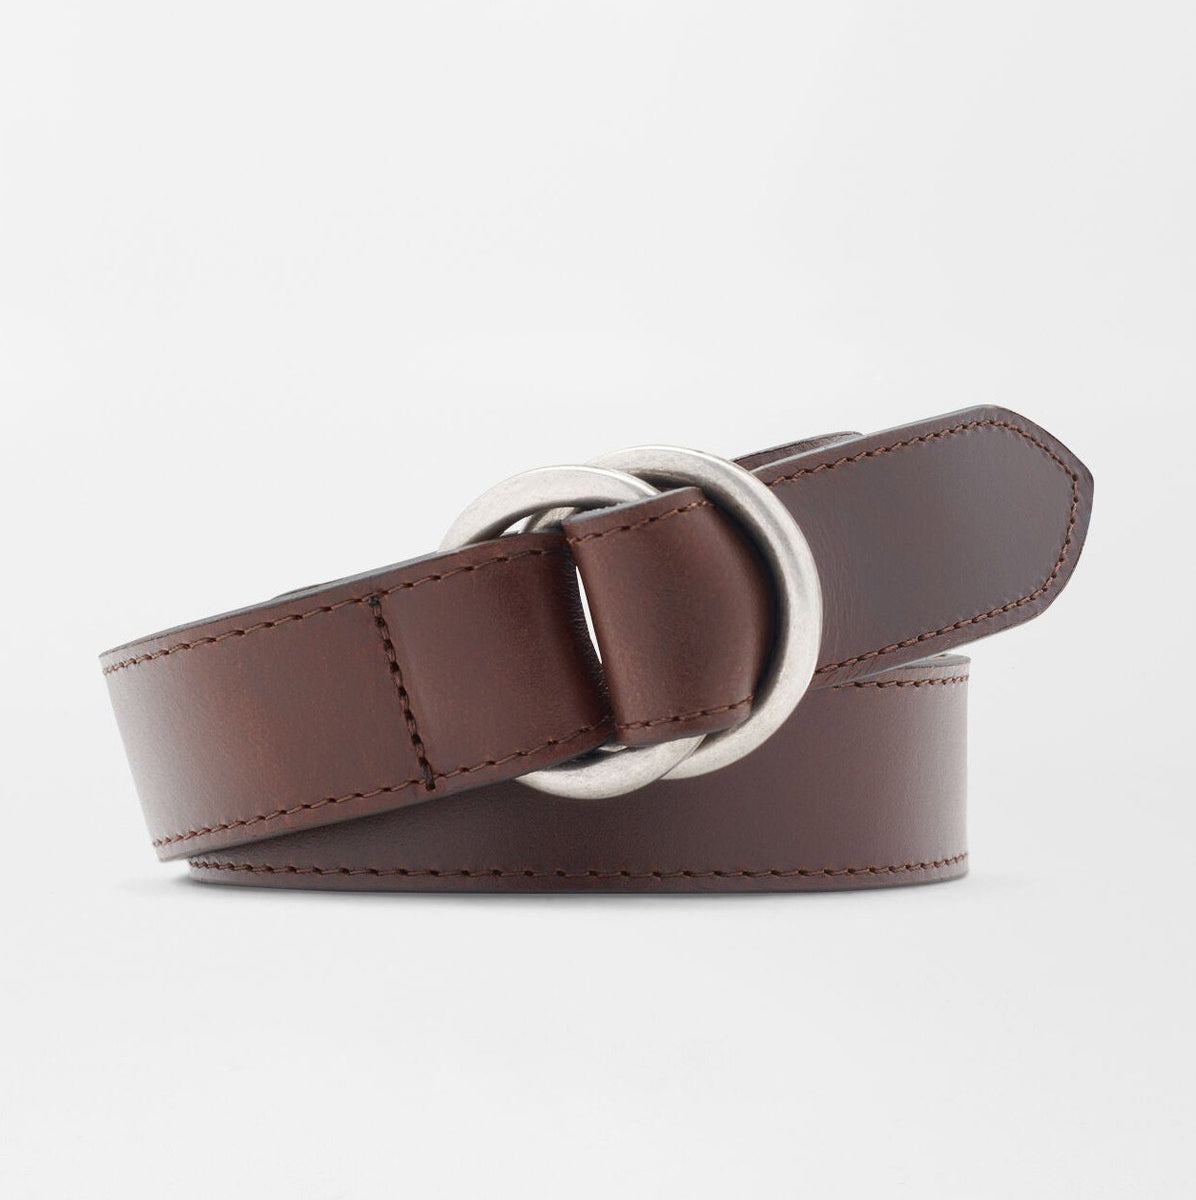 2 Double O-Ring Woven Belt Chocolate Leather